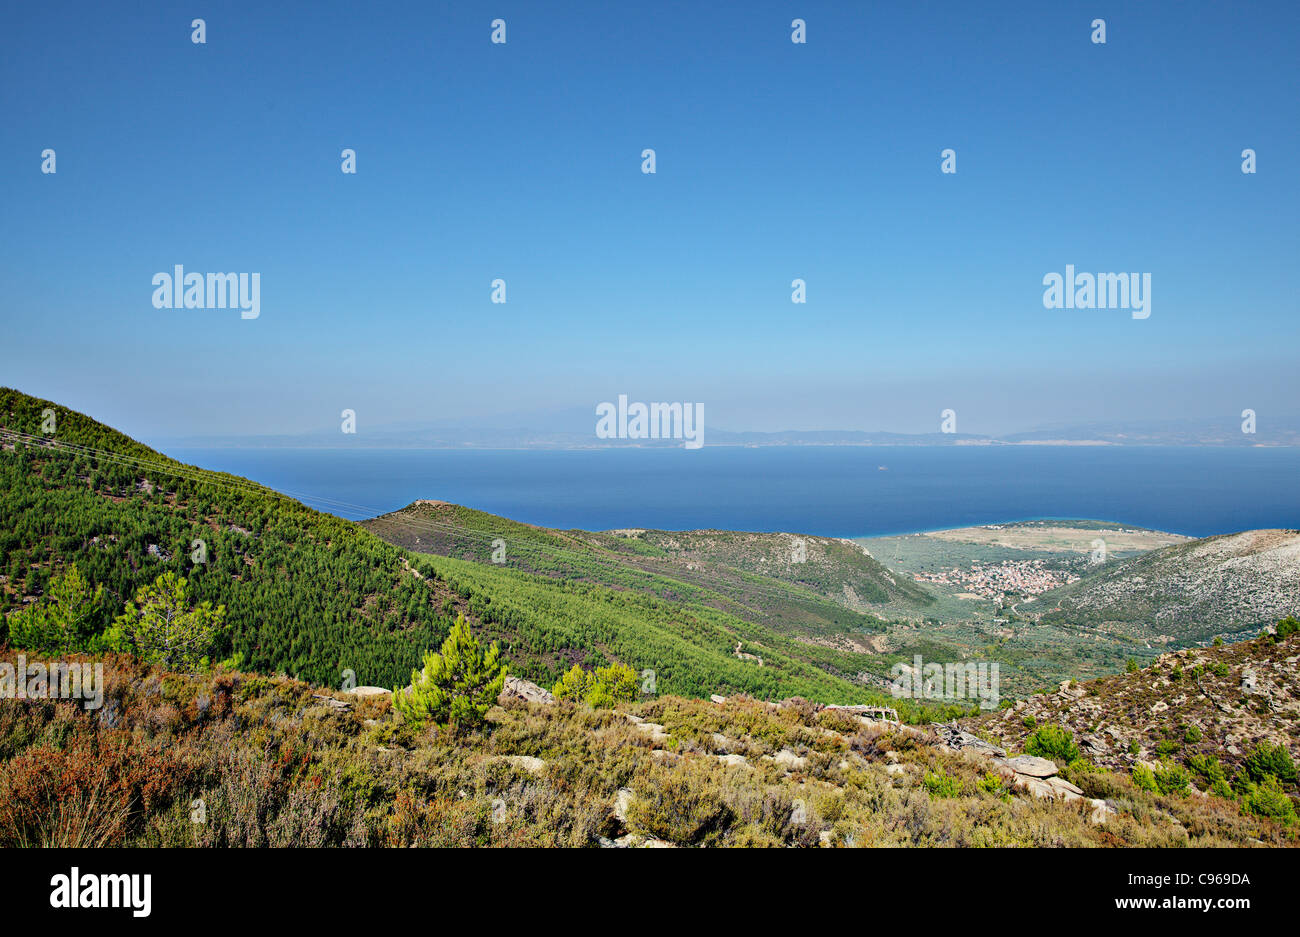 View over pine forest hills in Thassos island, Greece. Stock Photo